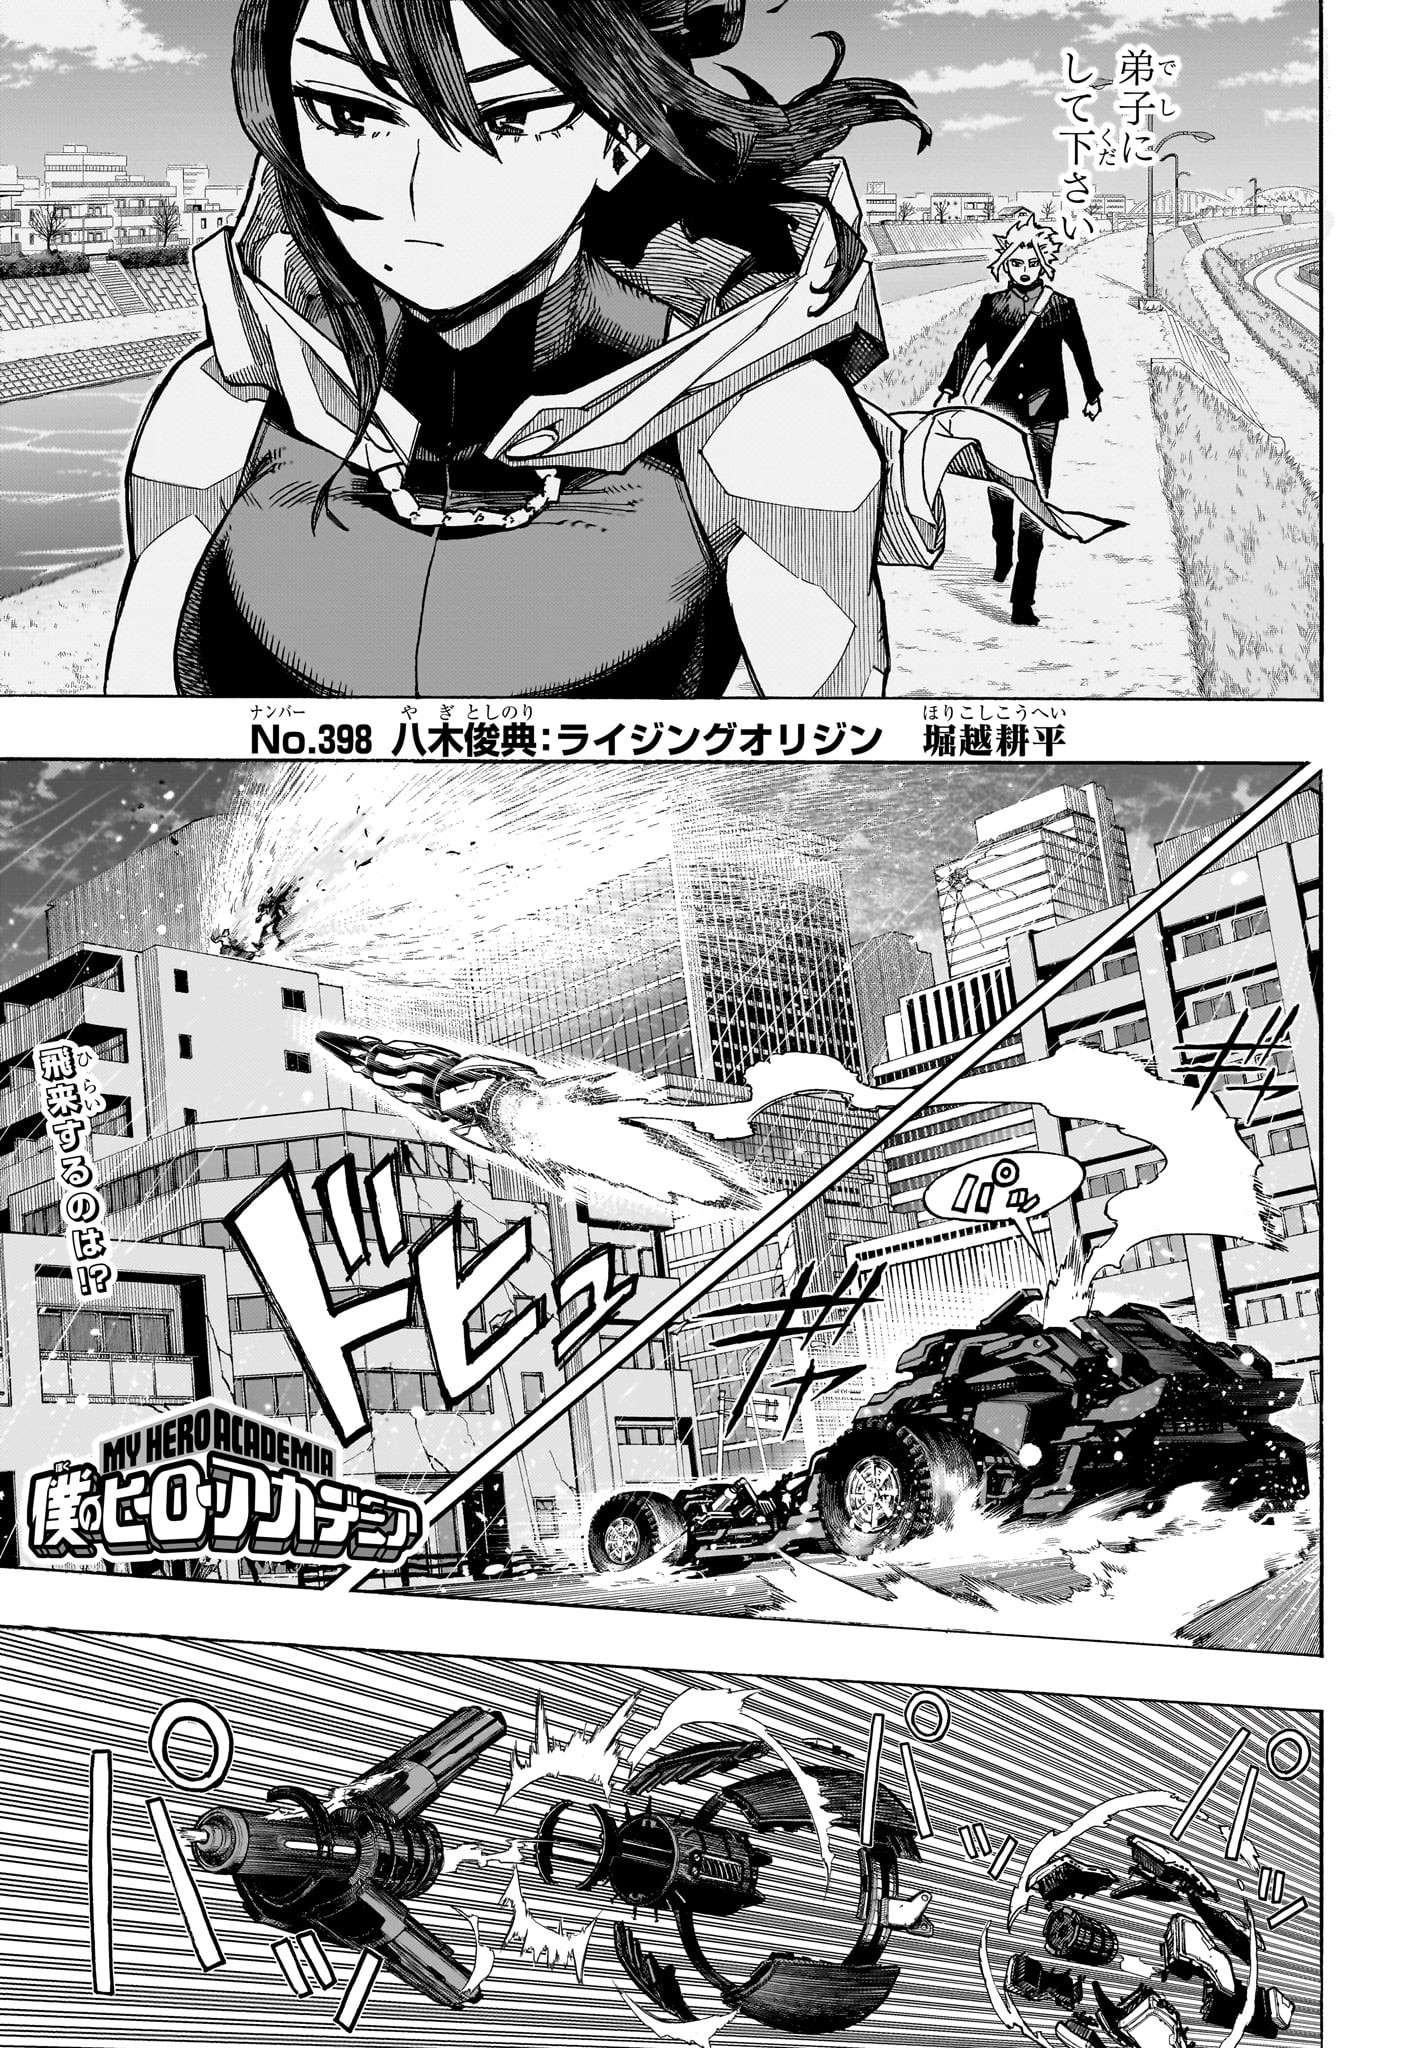 My Hero Academia Manga Chapter 407 Likely to Focus on All For One's  Backstory